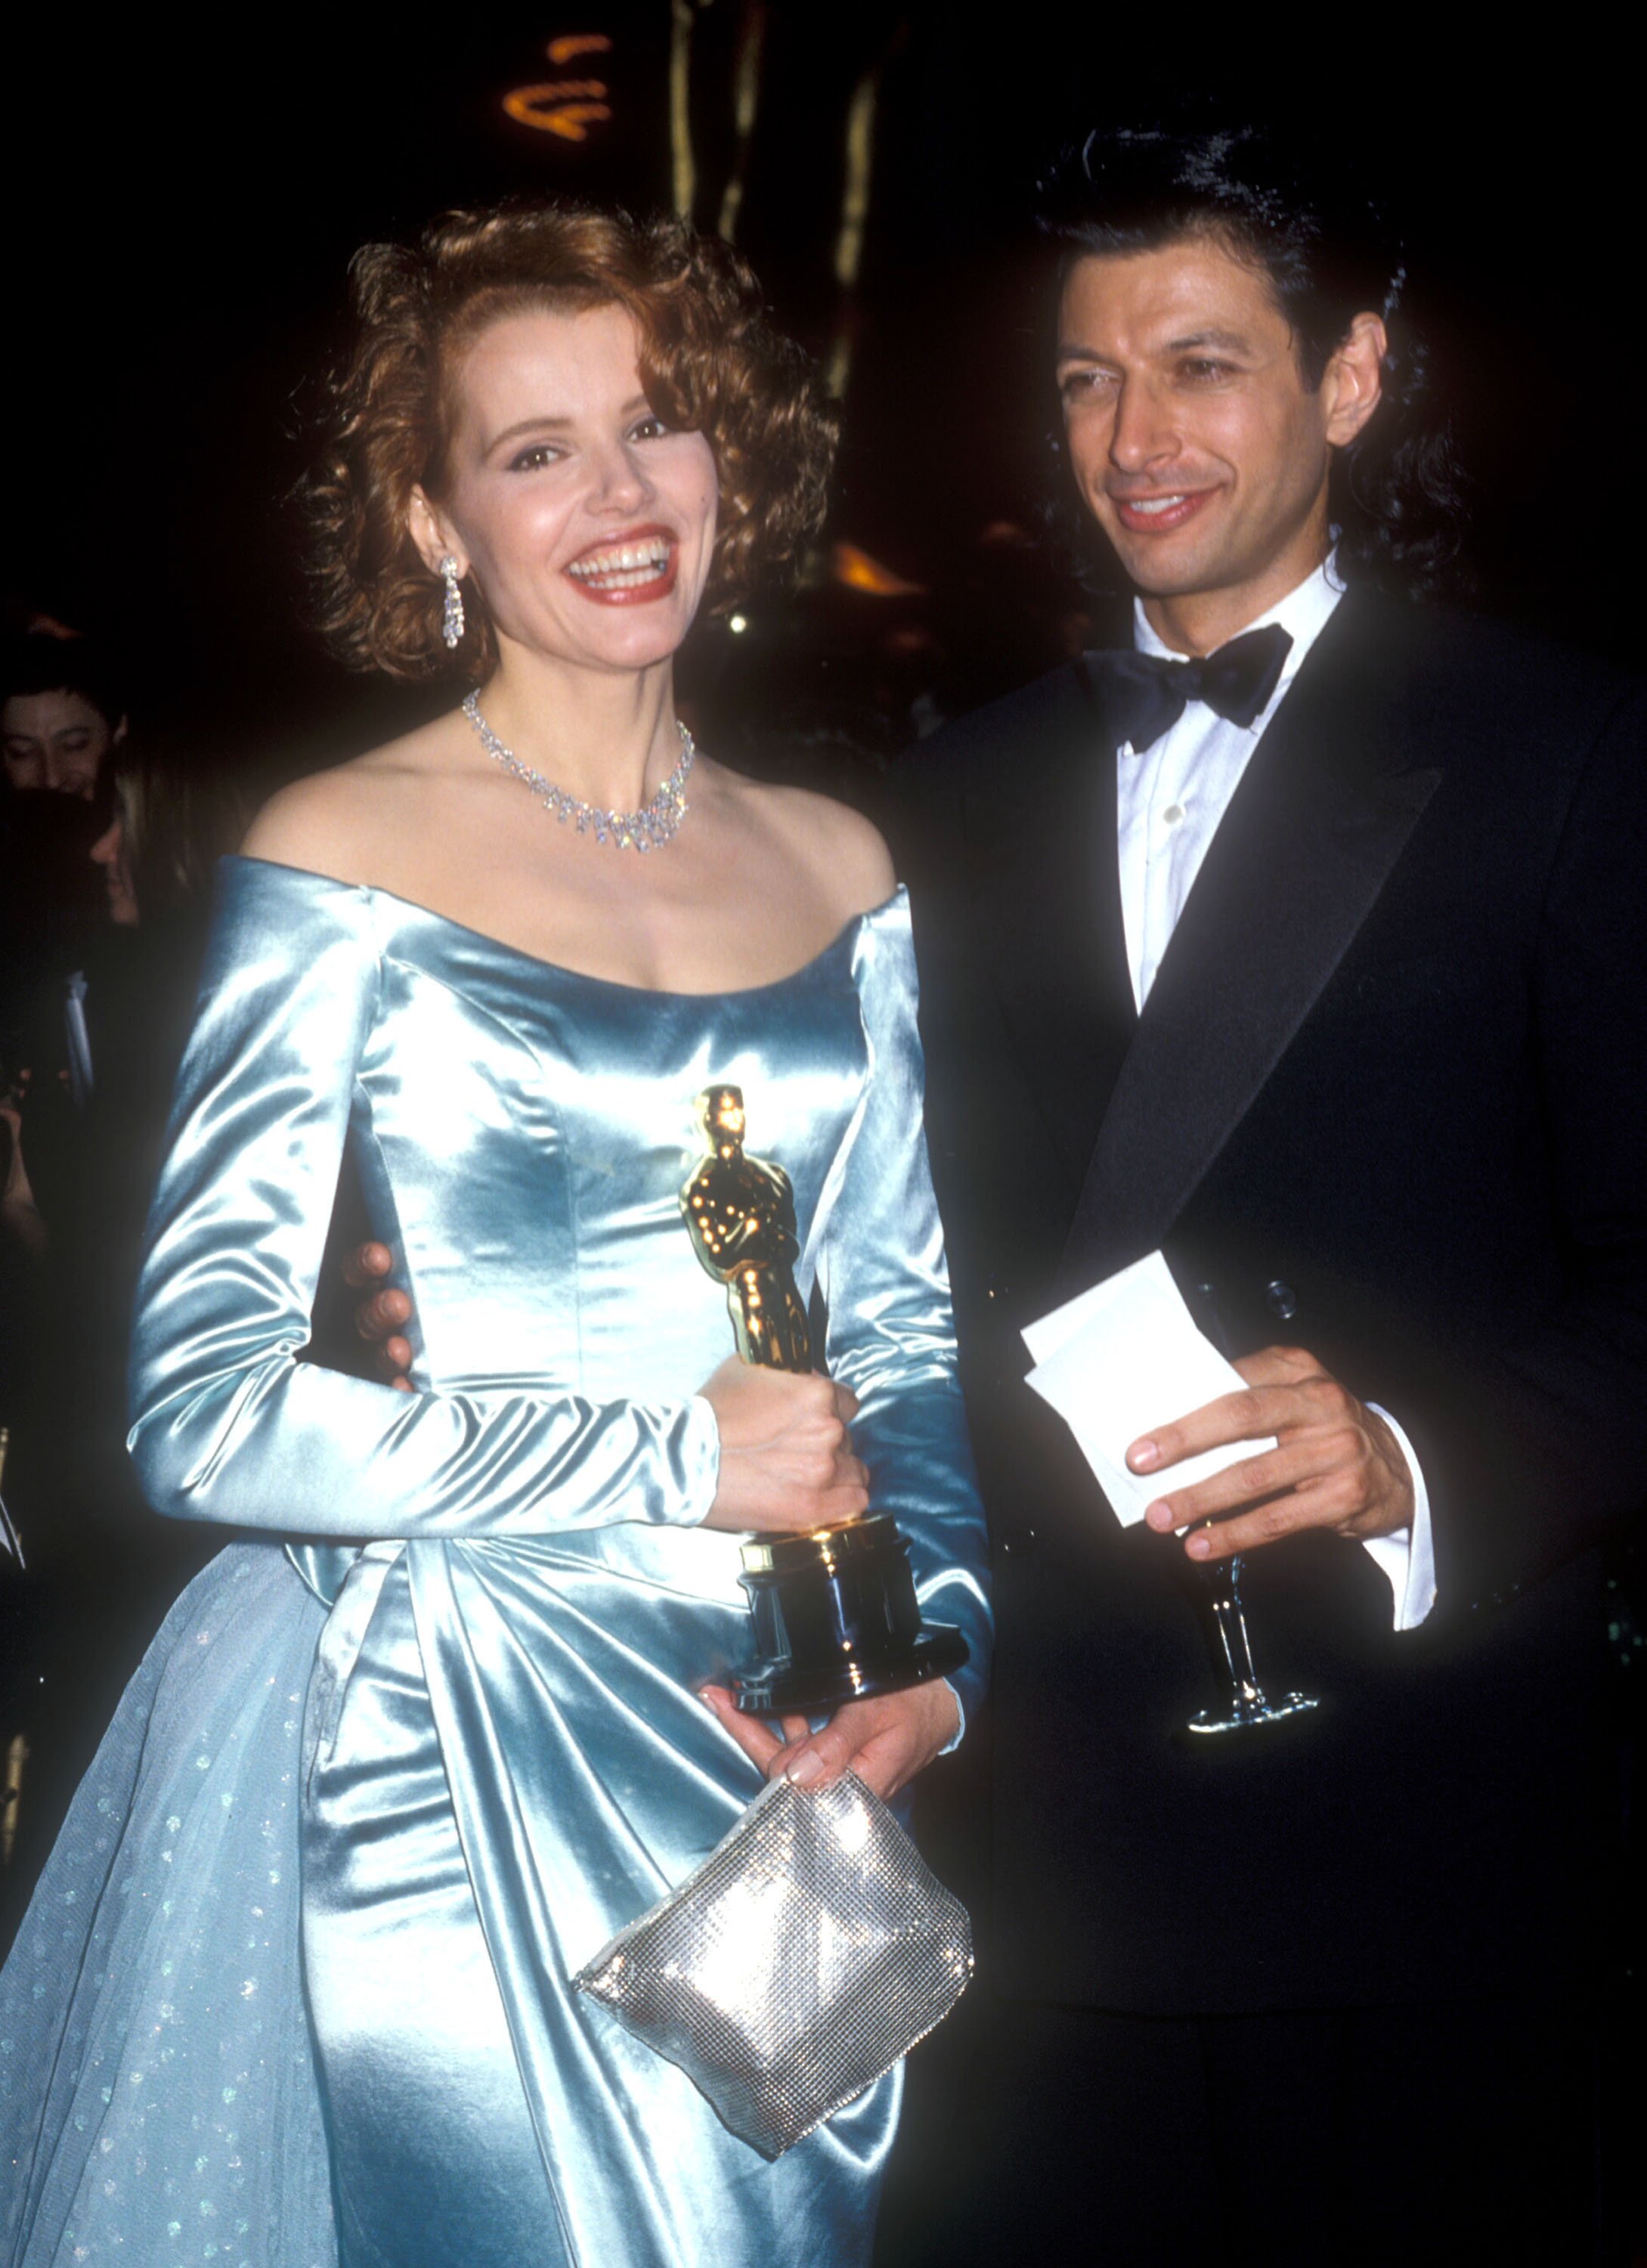 Geena Davis and Jeff Goldblum at the 61st Annual Academy Awards - Governor's Ball on March 29, 1989 | Source: Getty Images